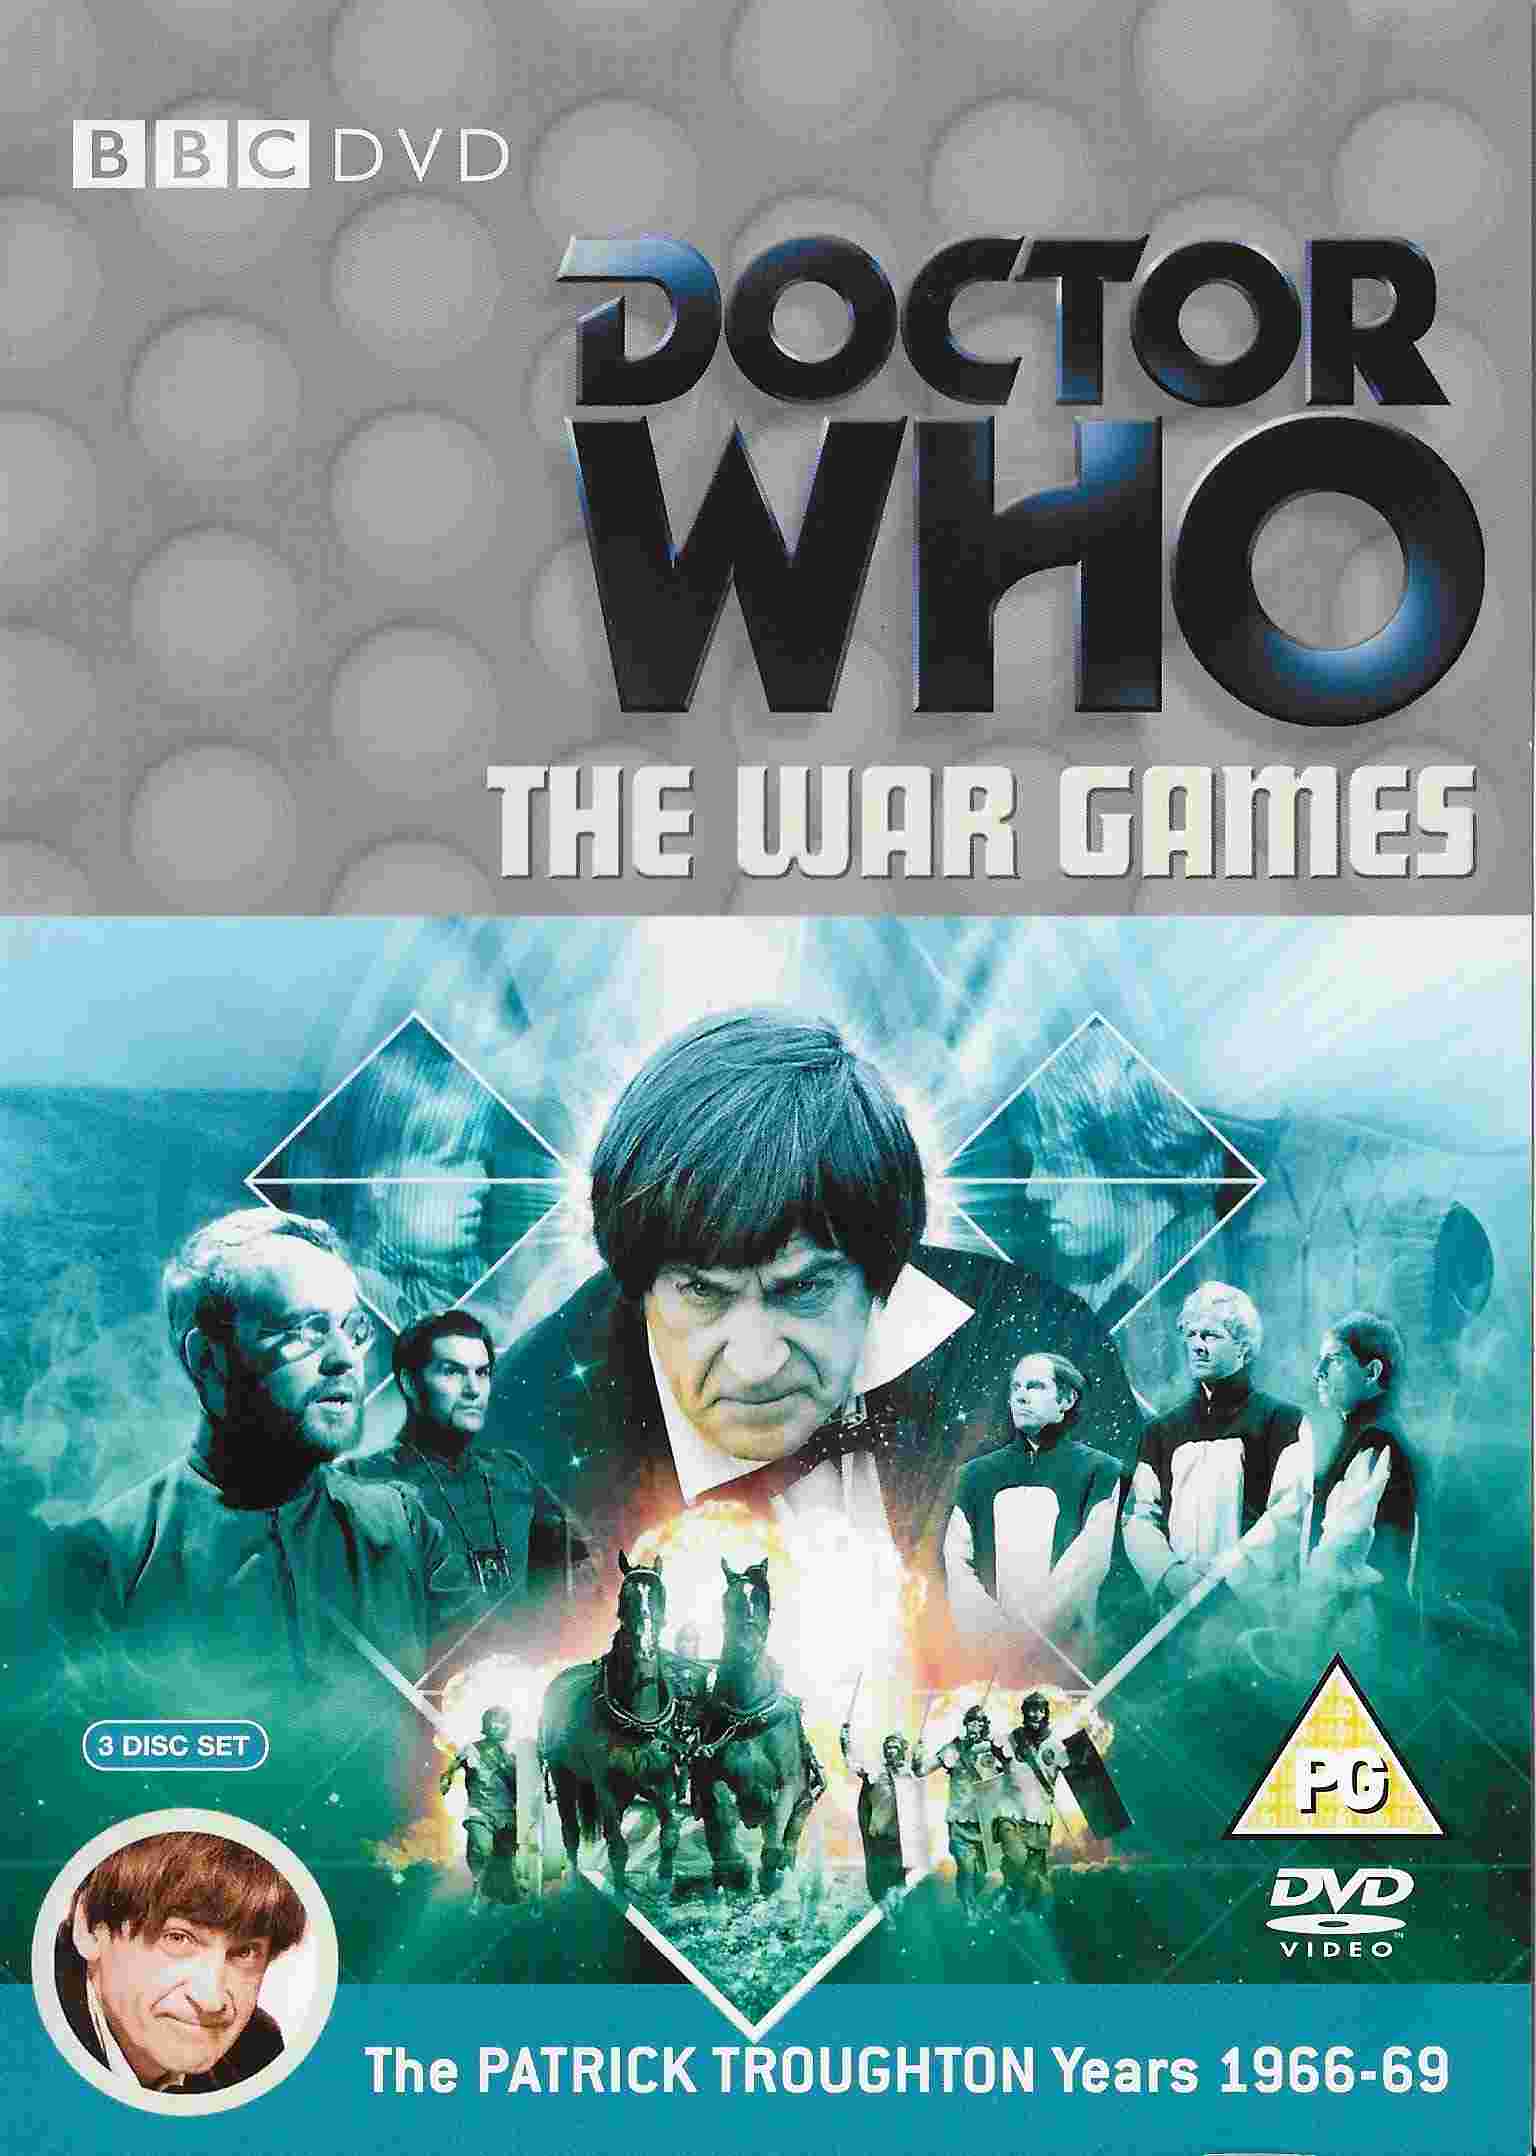 Picture of BBCDVD 1800 Doctor Who - The war games by artist Terrance Dicks / Malcolm Hulke from the BBC records and Tapes library